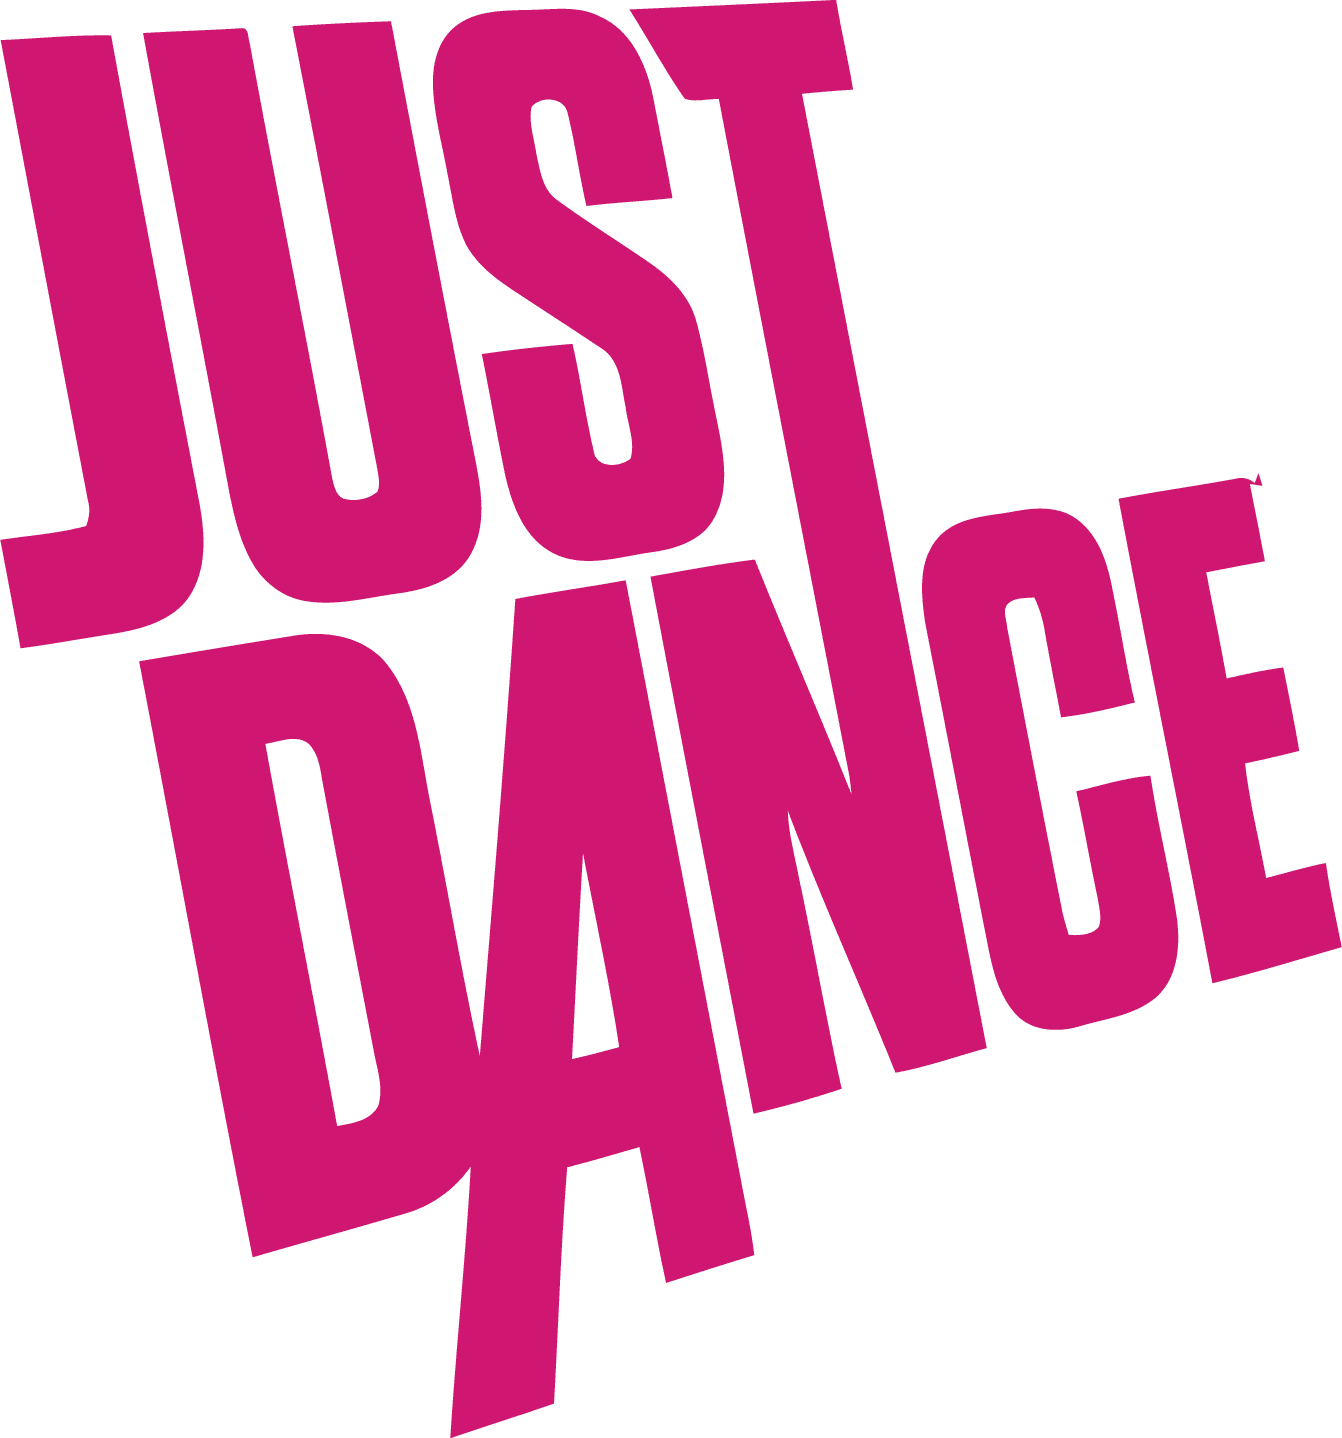 Just Dance logo in pink with a transparent background.